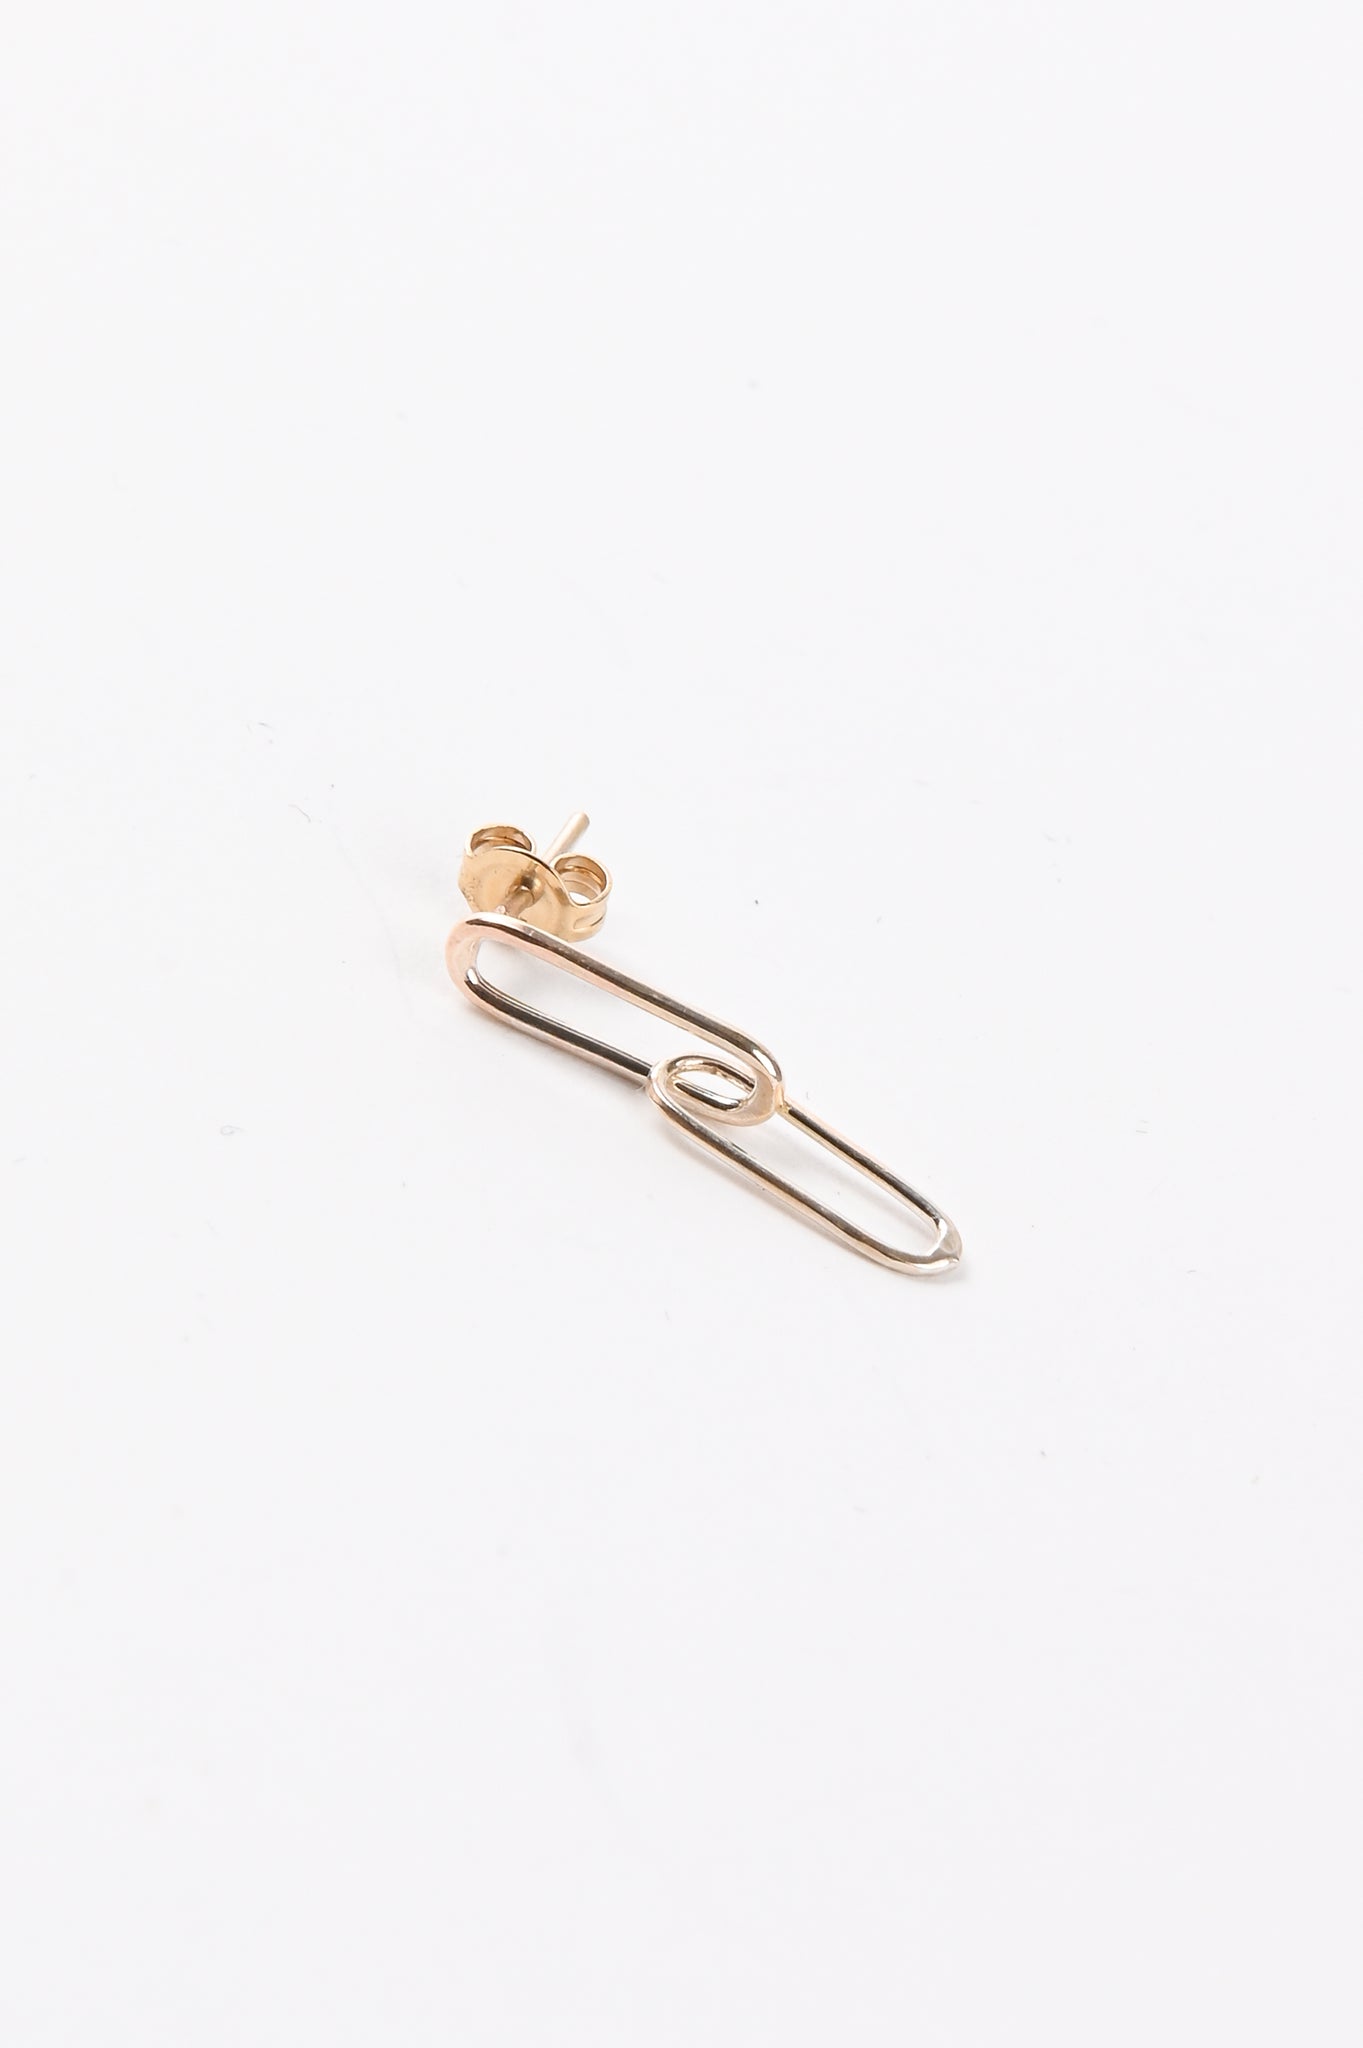 Kick In The Eye 'Original Chain' Light 2 Link Earring In 9ct Gold